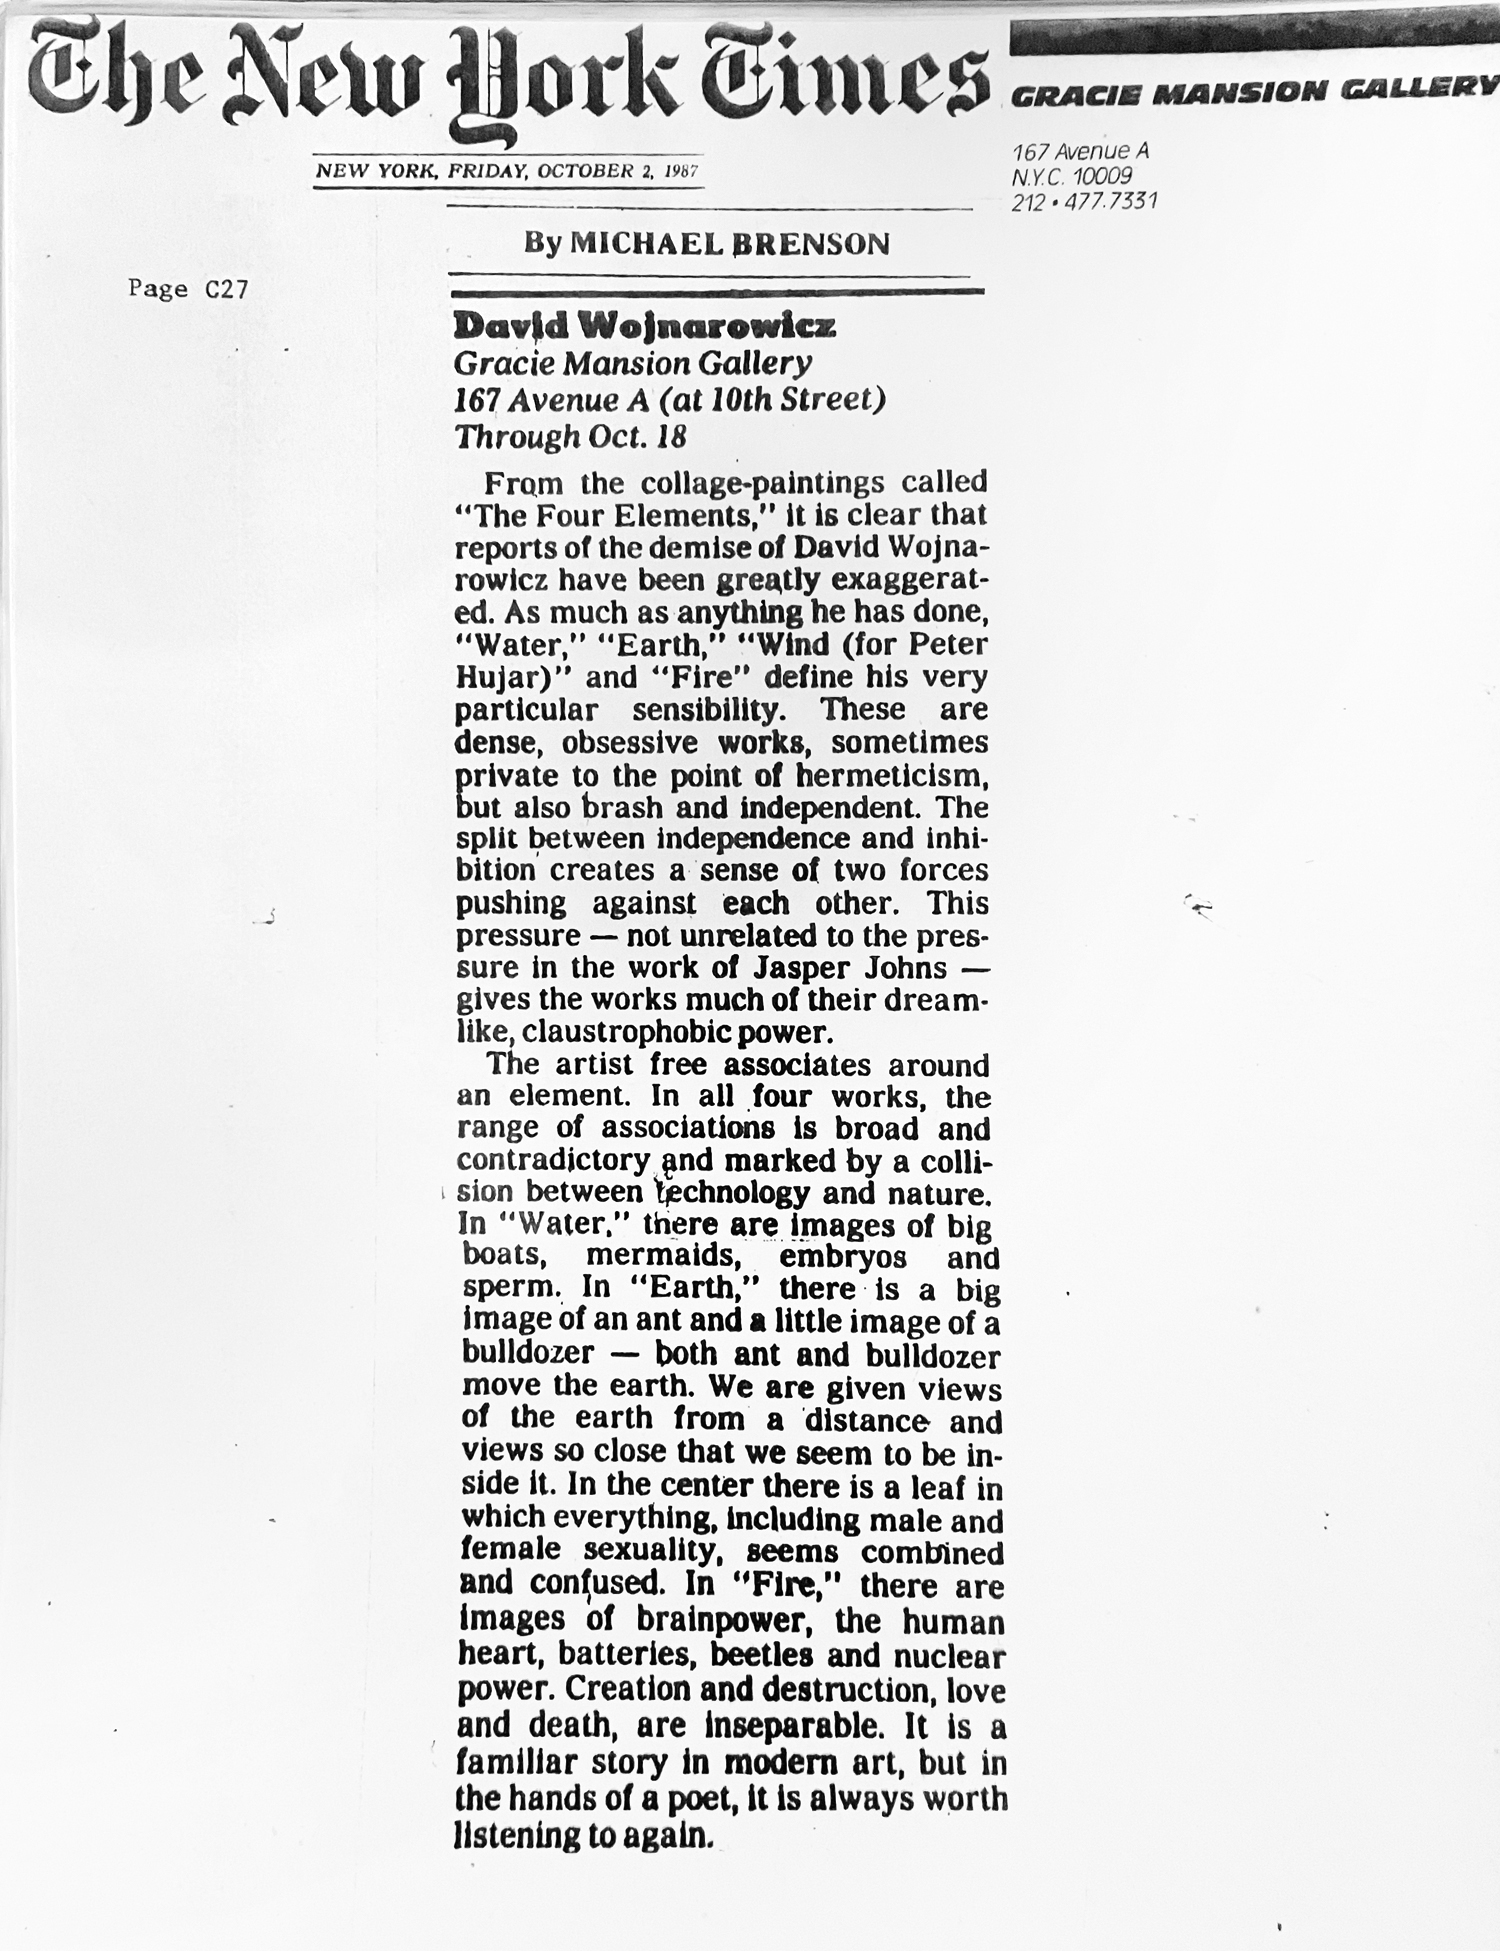 Michael Brensen review, "the Four Elements," Gracie Mansion Gallery, NYTimes, October 26, 1987